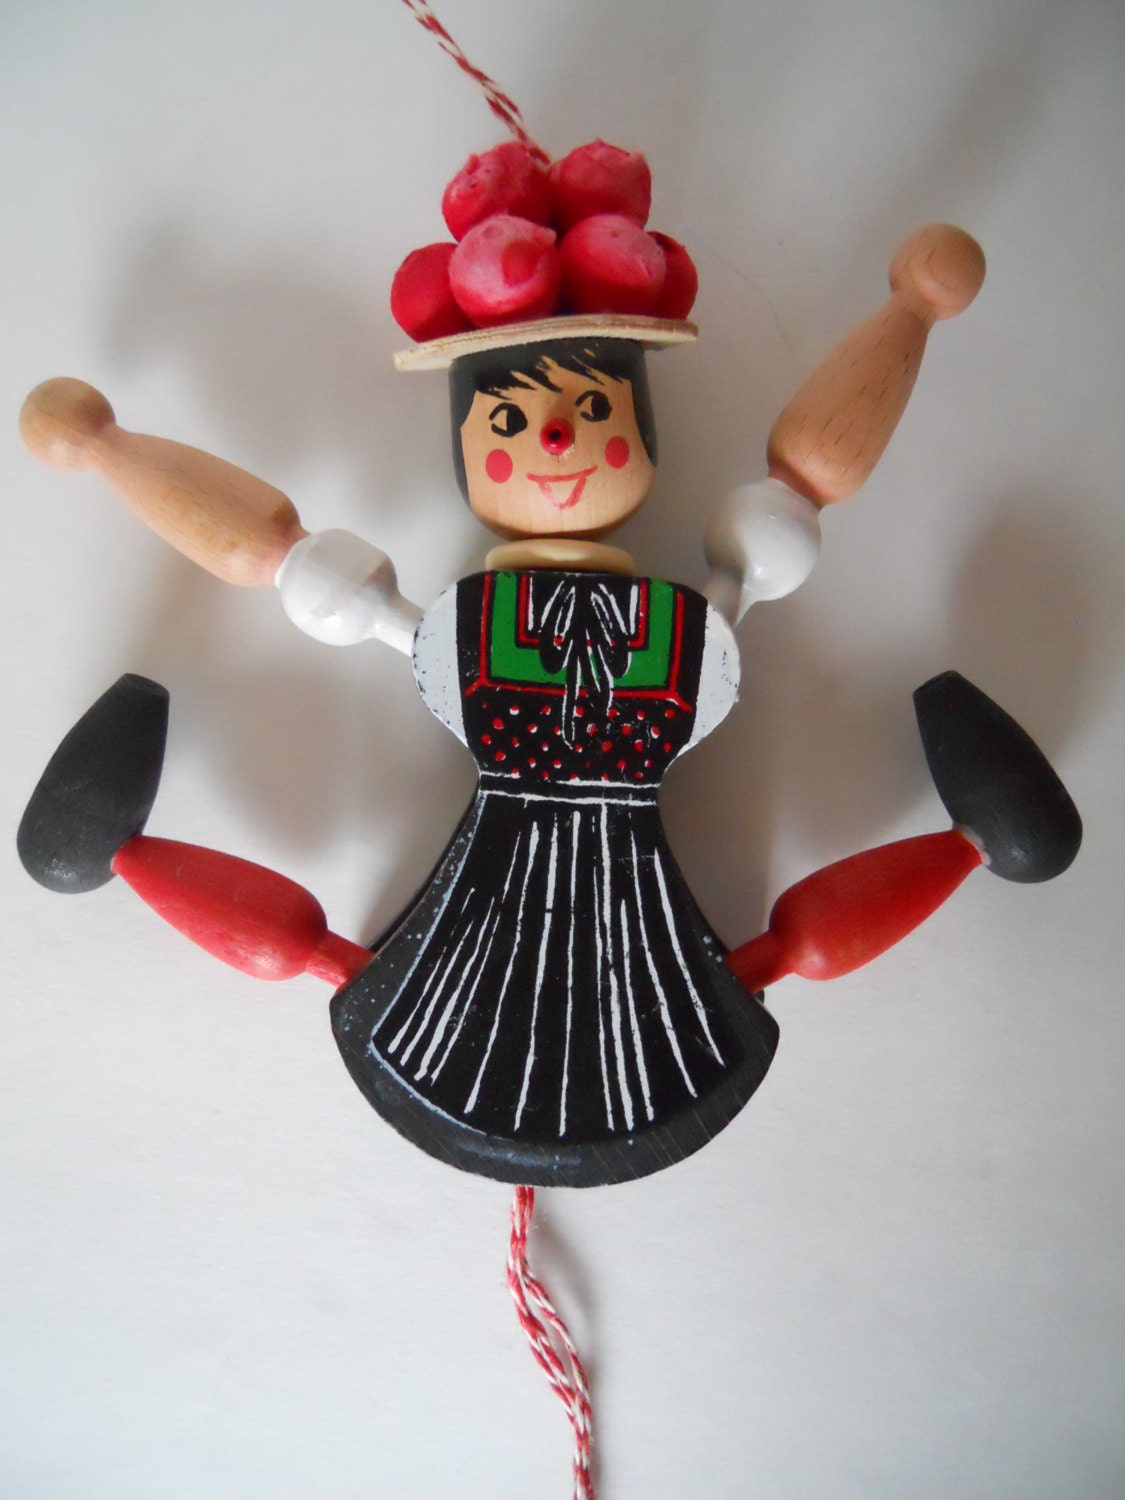 Darling Vintage Wood Jumping Jack Doll Toy Gschnitzer Toy